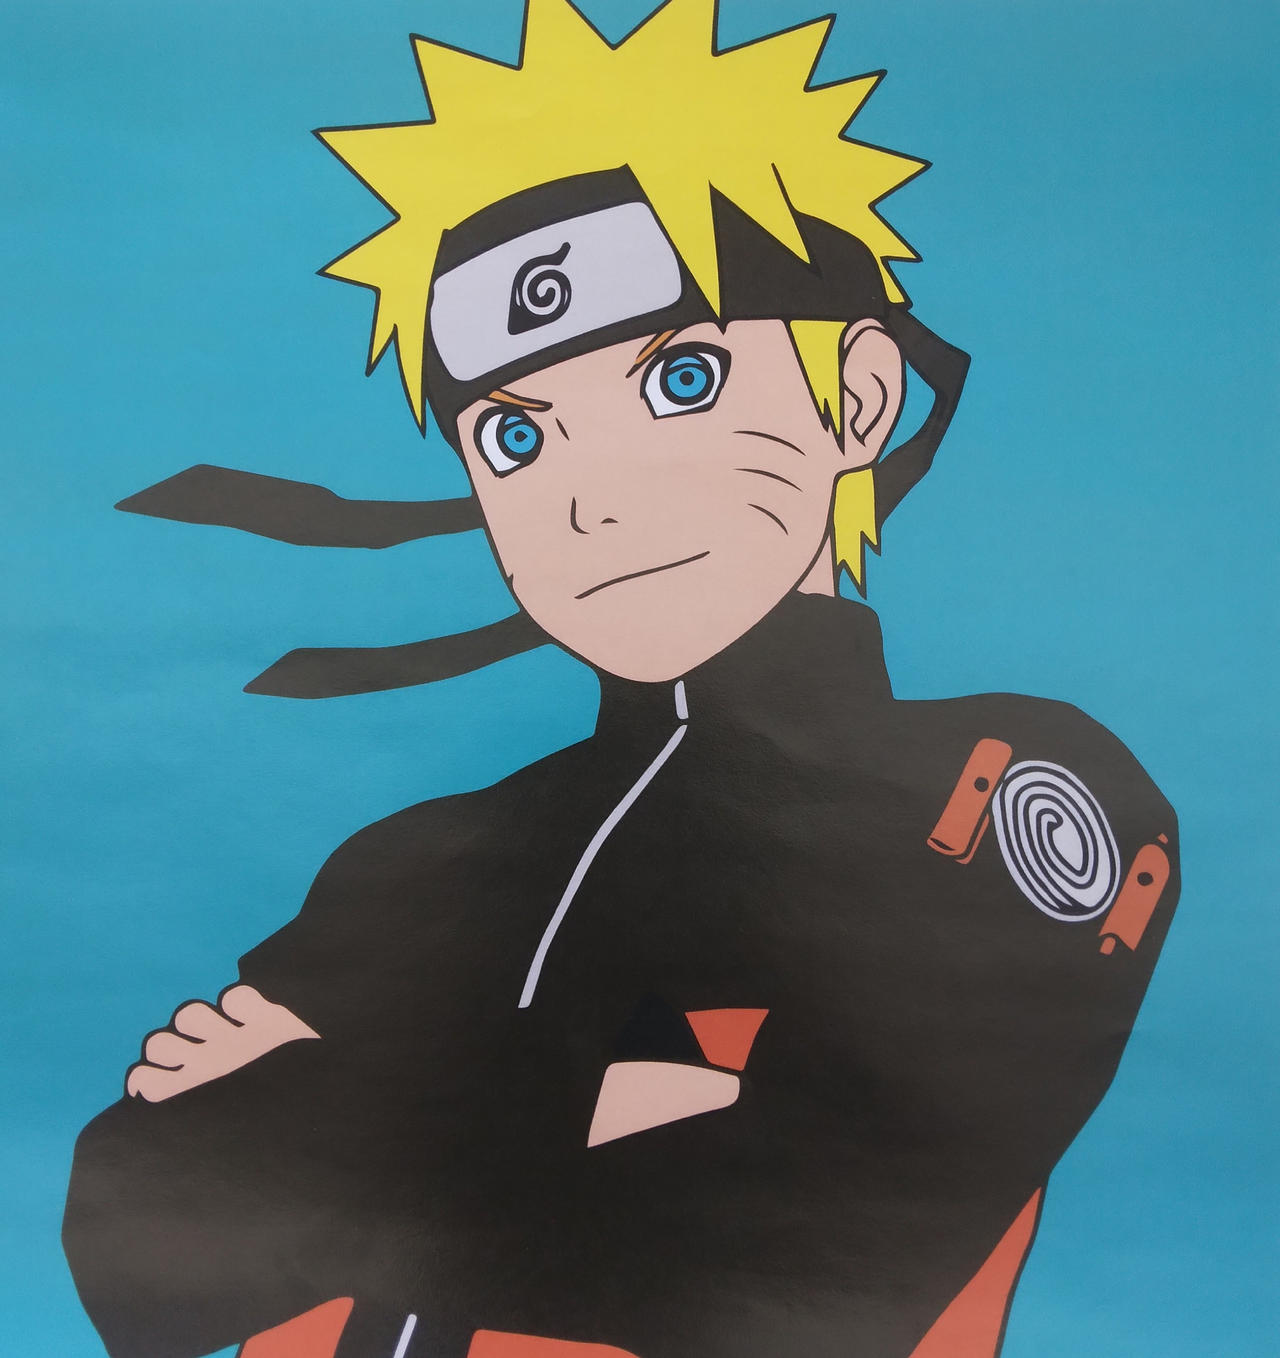 boruto 1 Coloring Page - Anime Coloring Pages